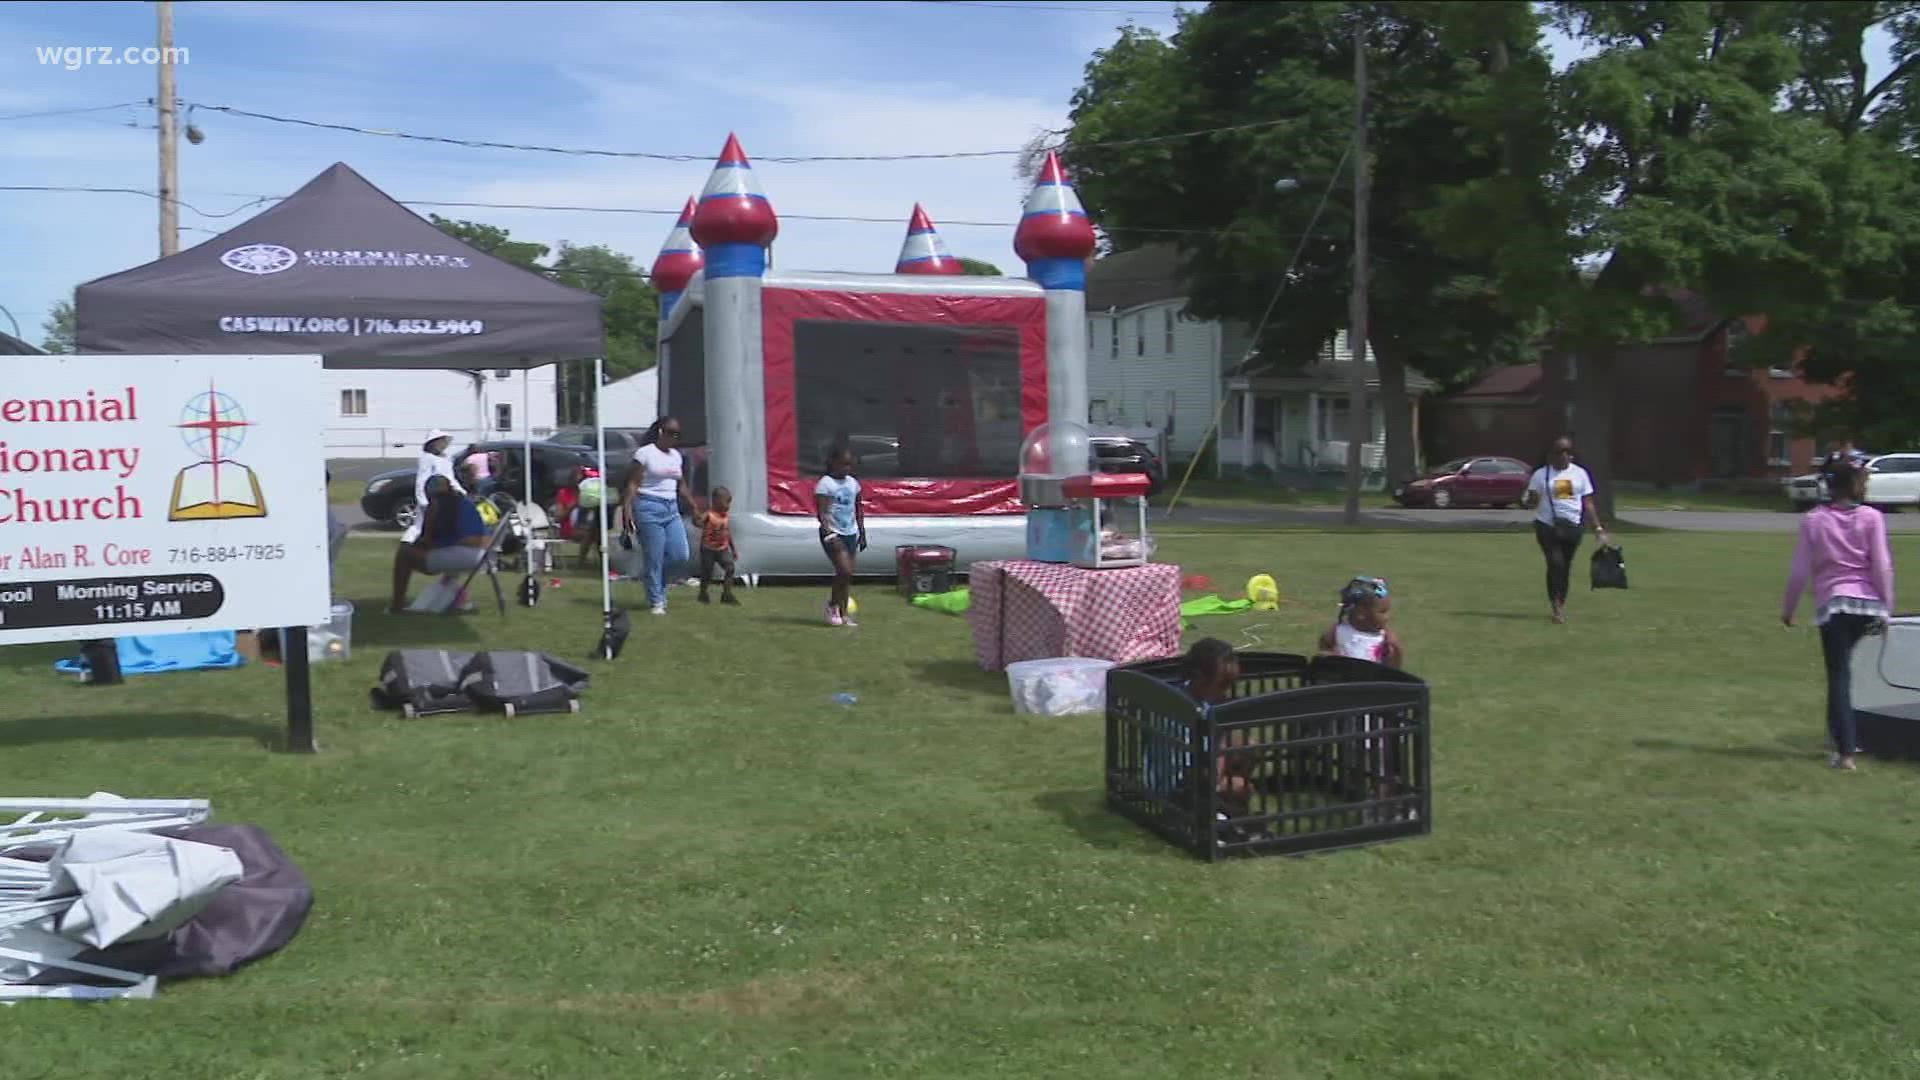 Families gathered at the buffalo federation of neighborhood centers for some summer fun.
Organizers setup bounce houses, a petting zoo, live music and much more.